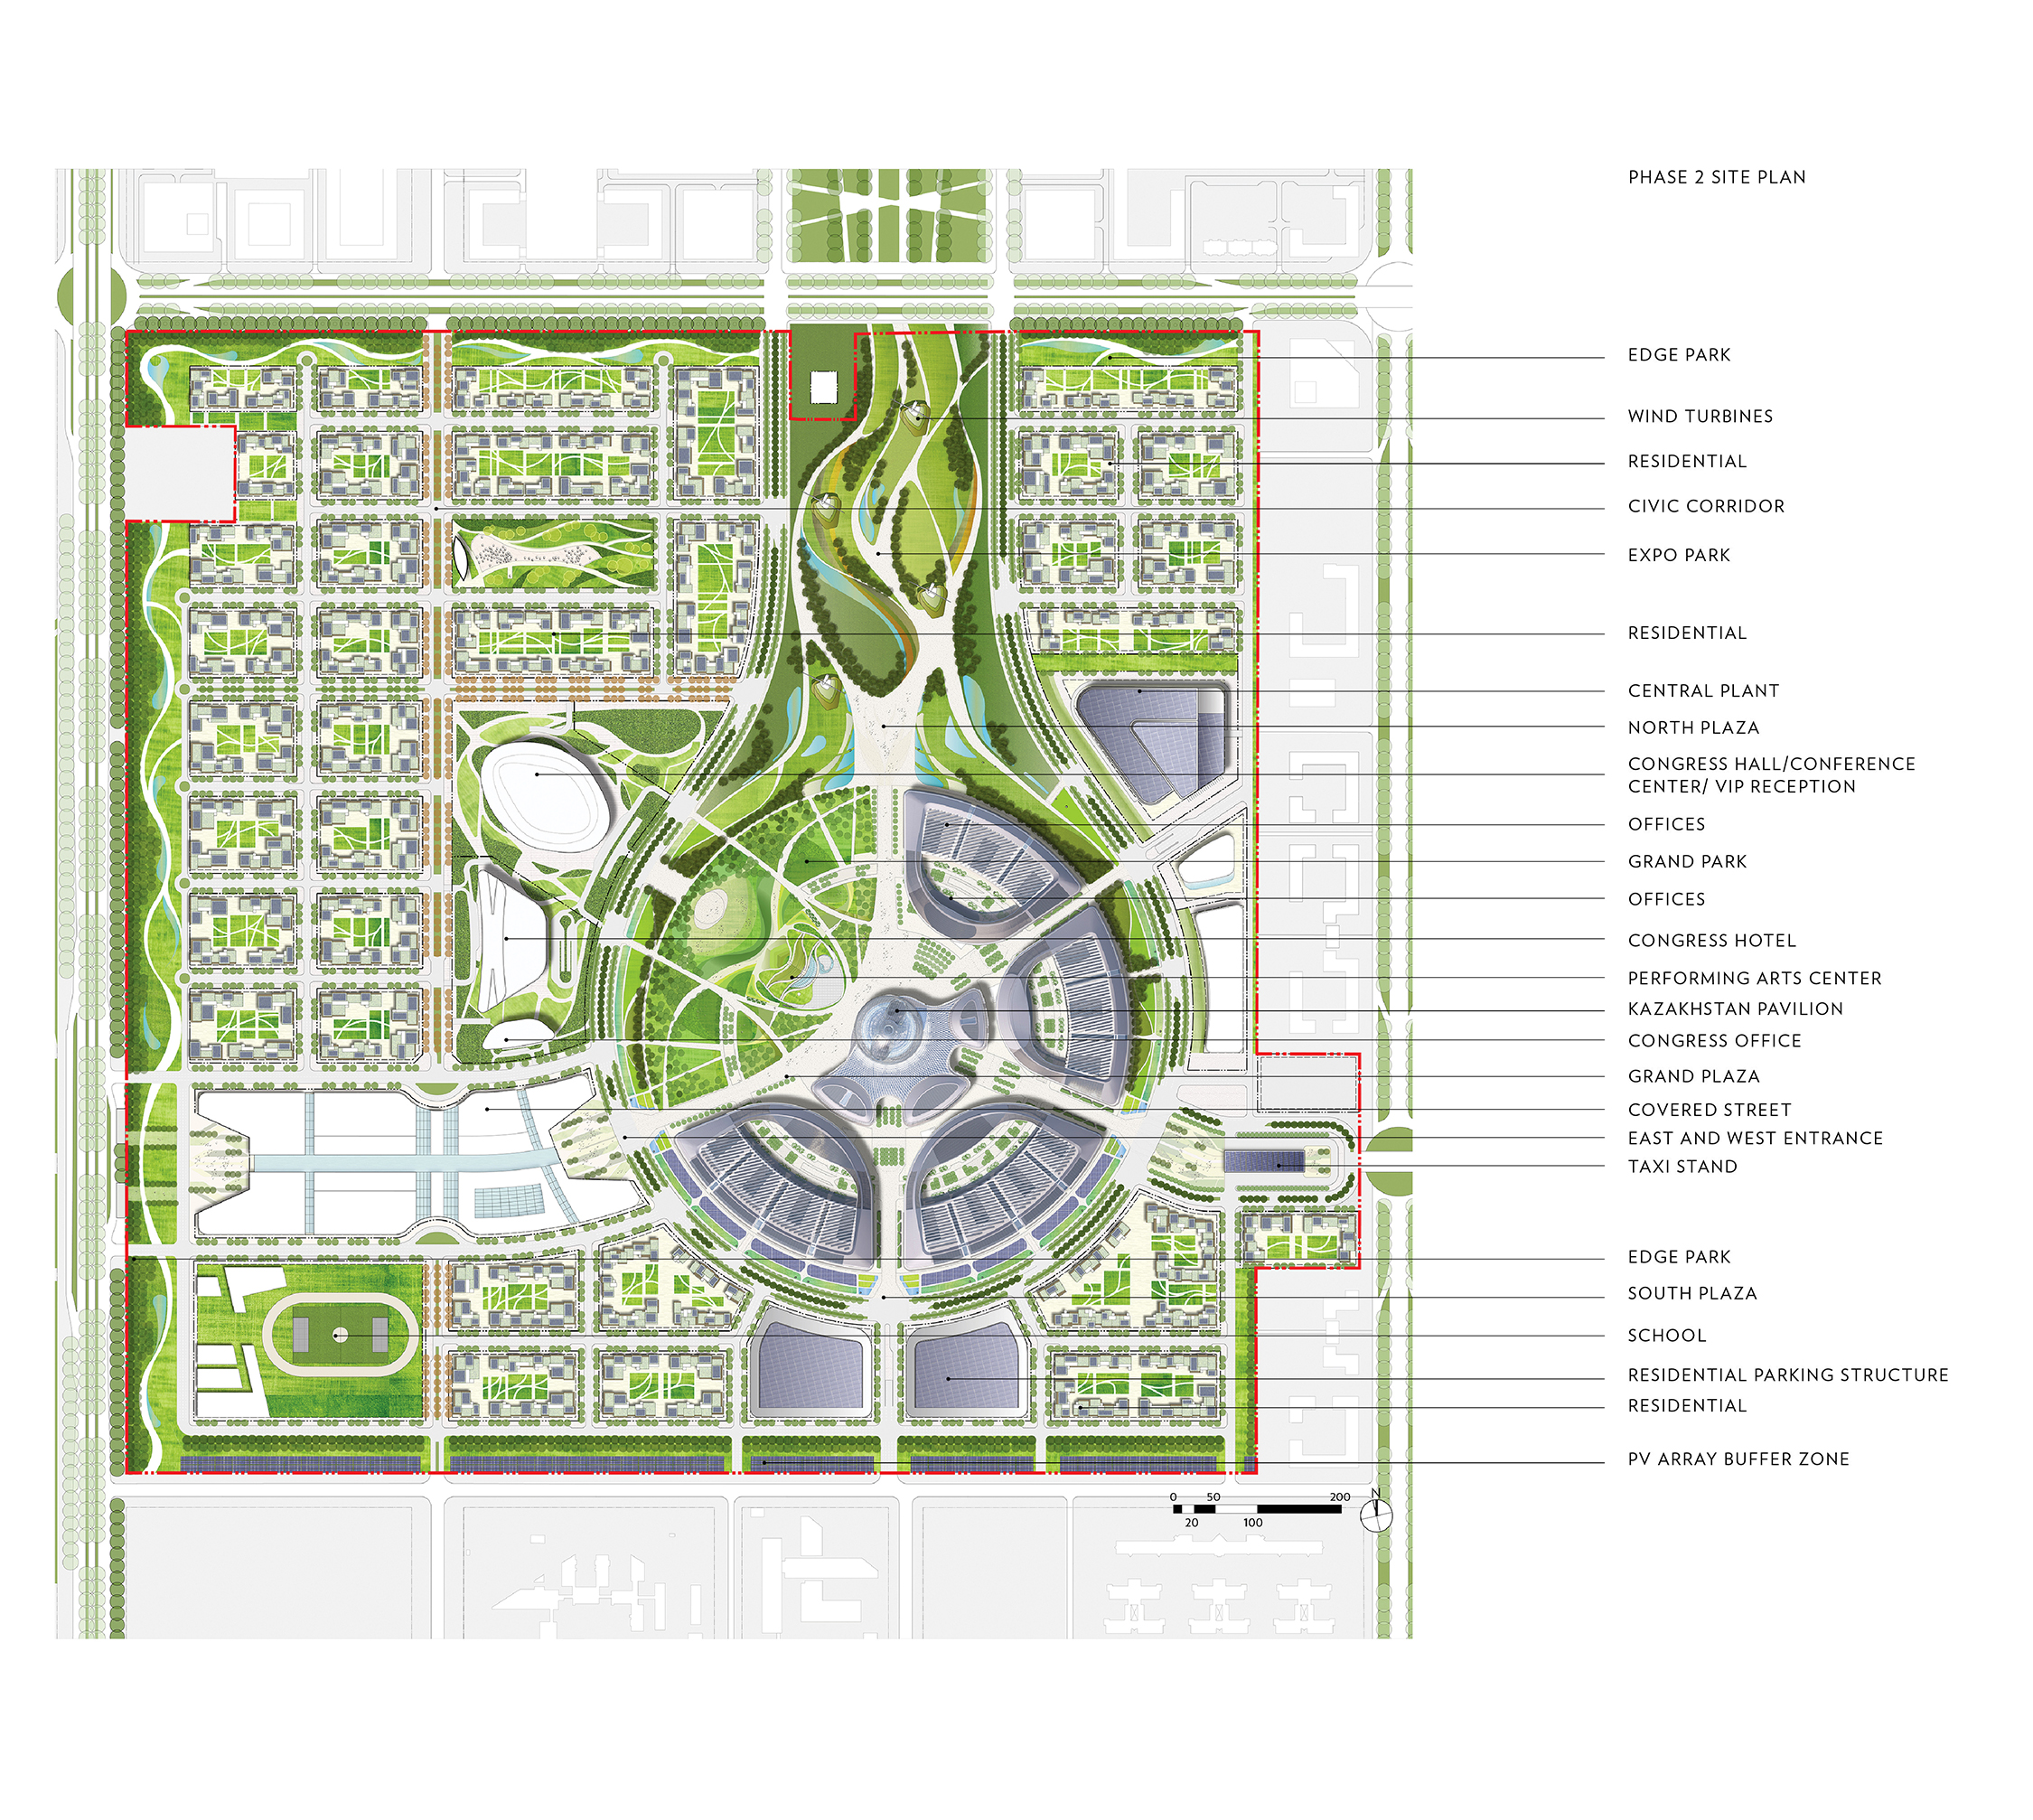 Phase 2 site plan-adjusted